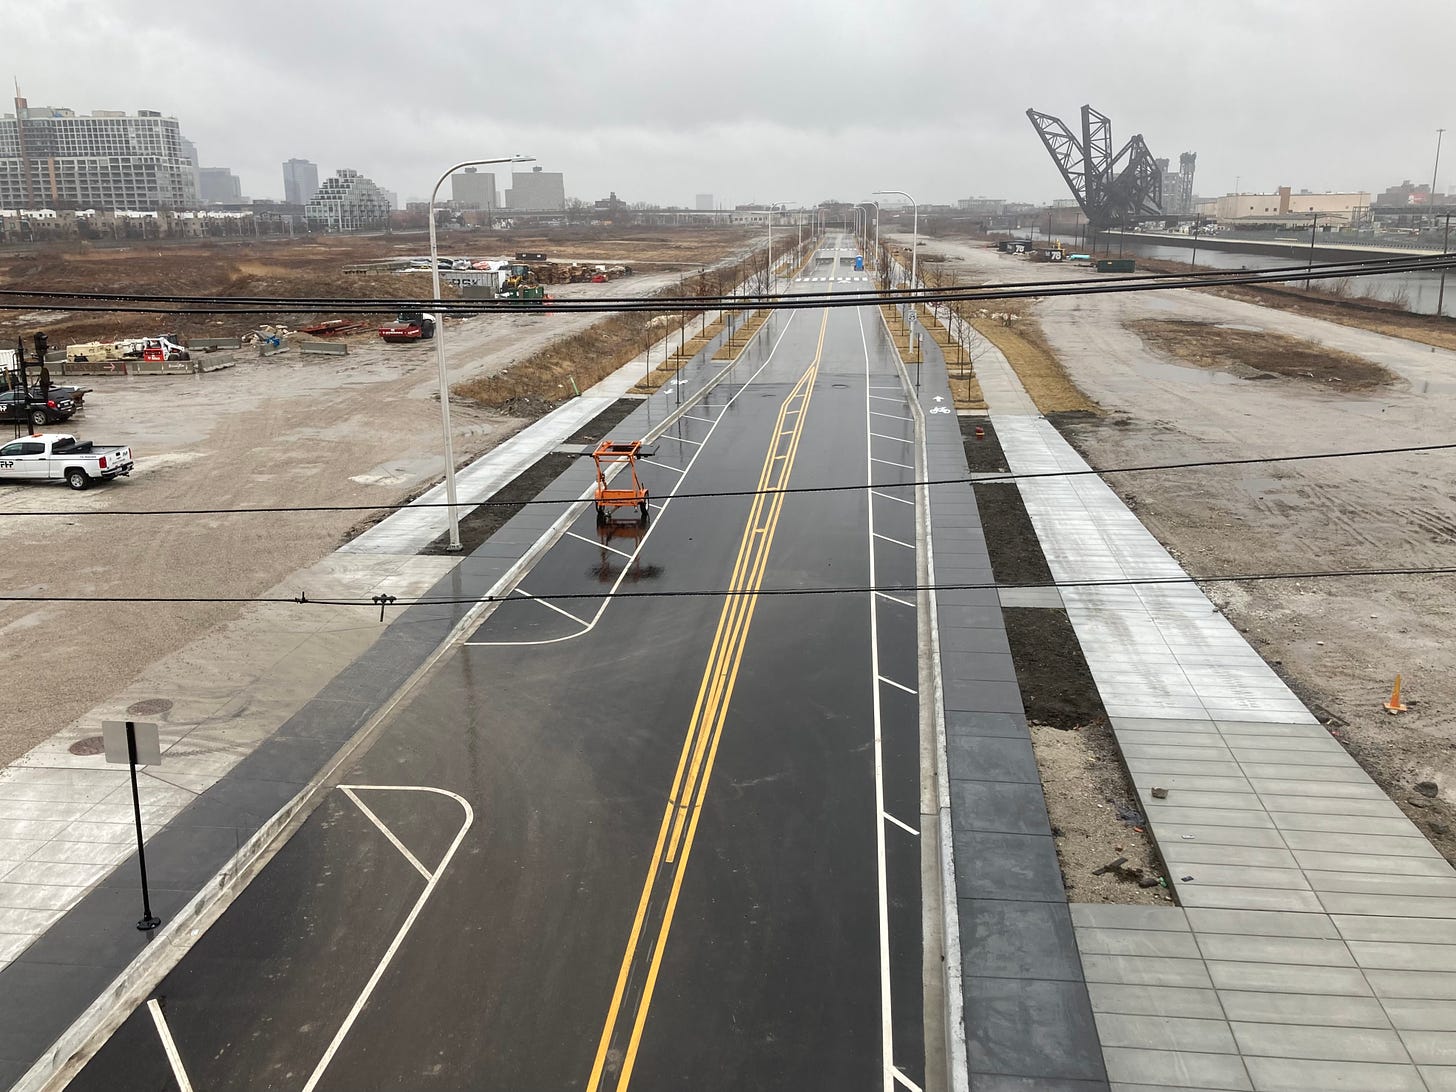 Eyes on the street: Raised bike lanes are taking shape on Wells-Wentworth  Connector - Streetsblog Chicago